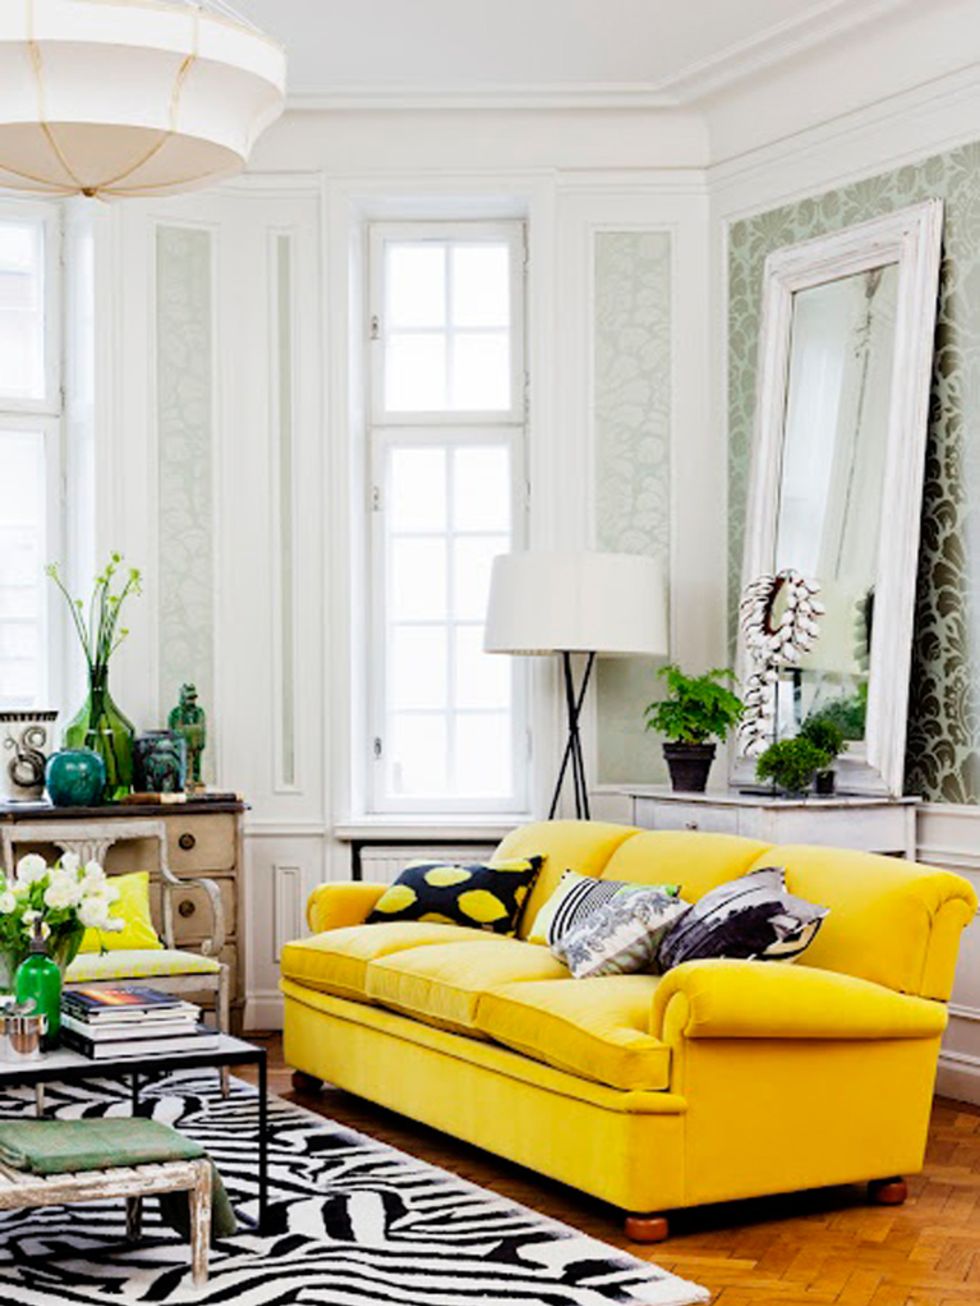 Room, Interior design, Green, Yellow, Living room, Home, Wall, Couch, Interior design, Ceiling, 